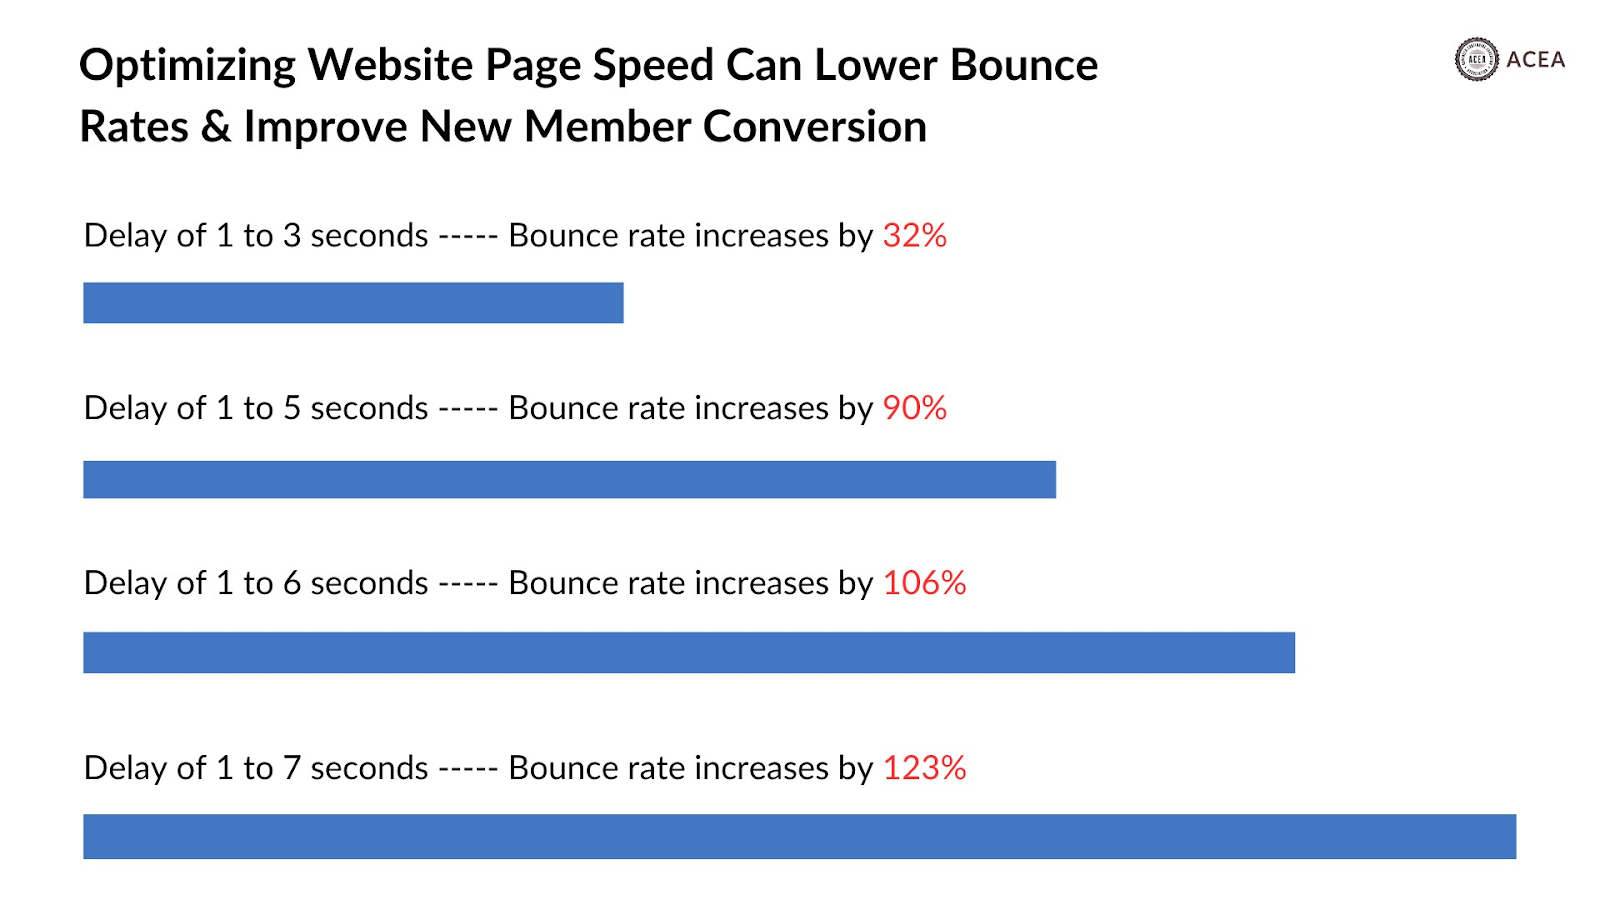 Optimizing website page speed can lower bounce rate and improve new member conversion